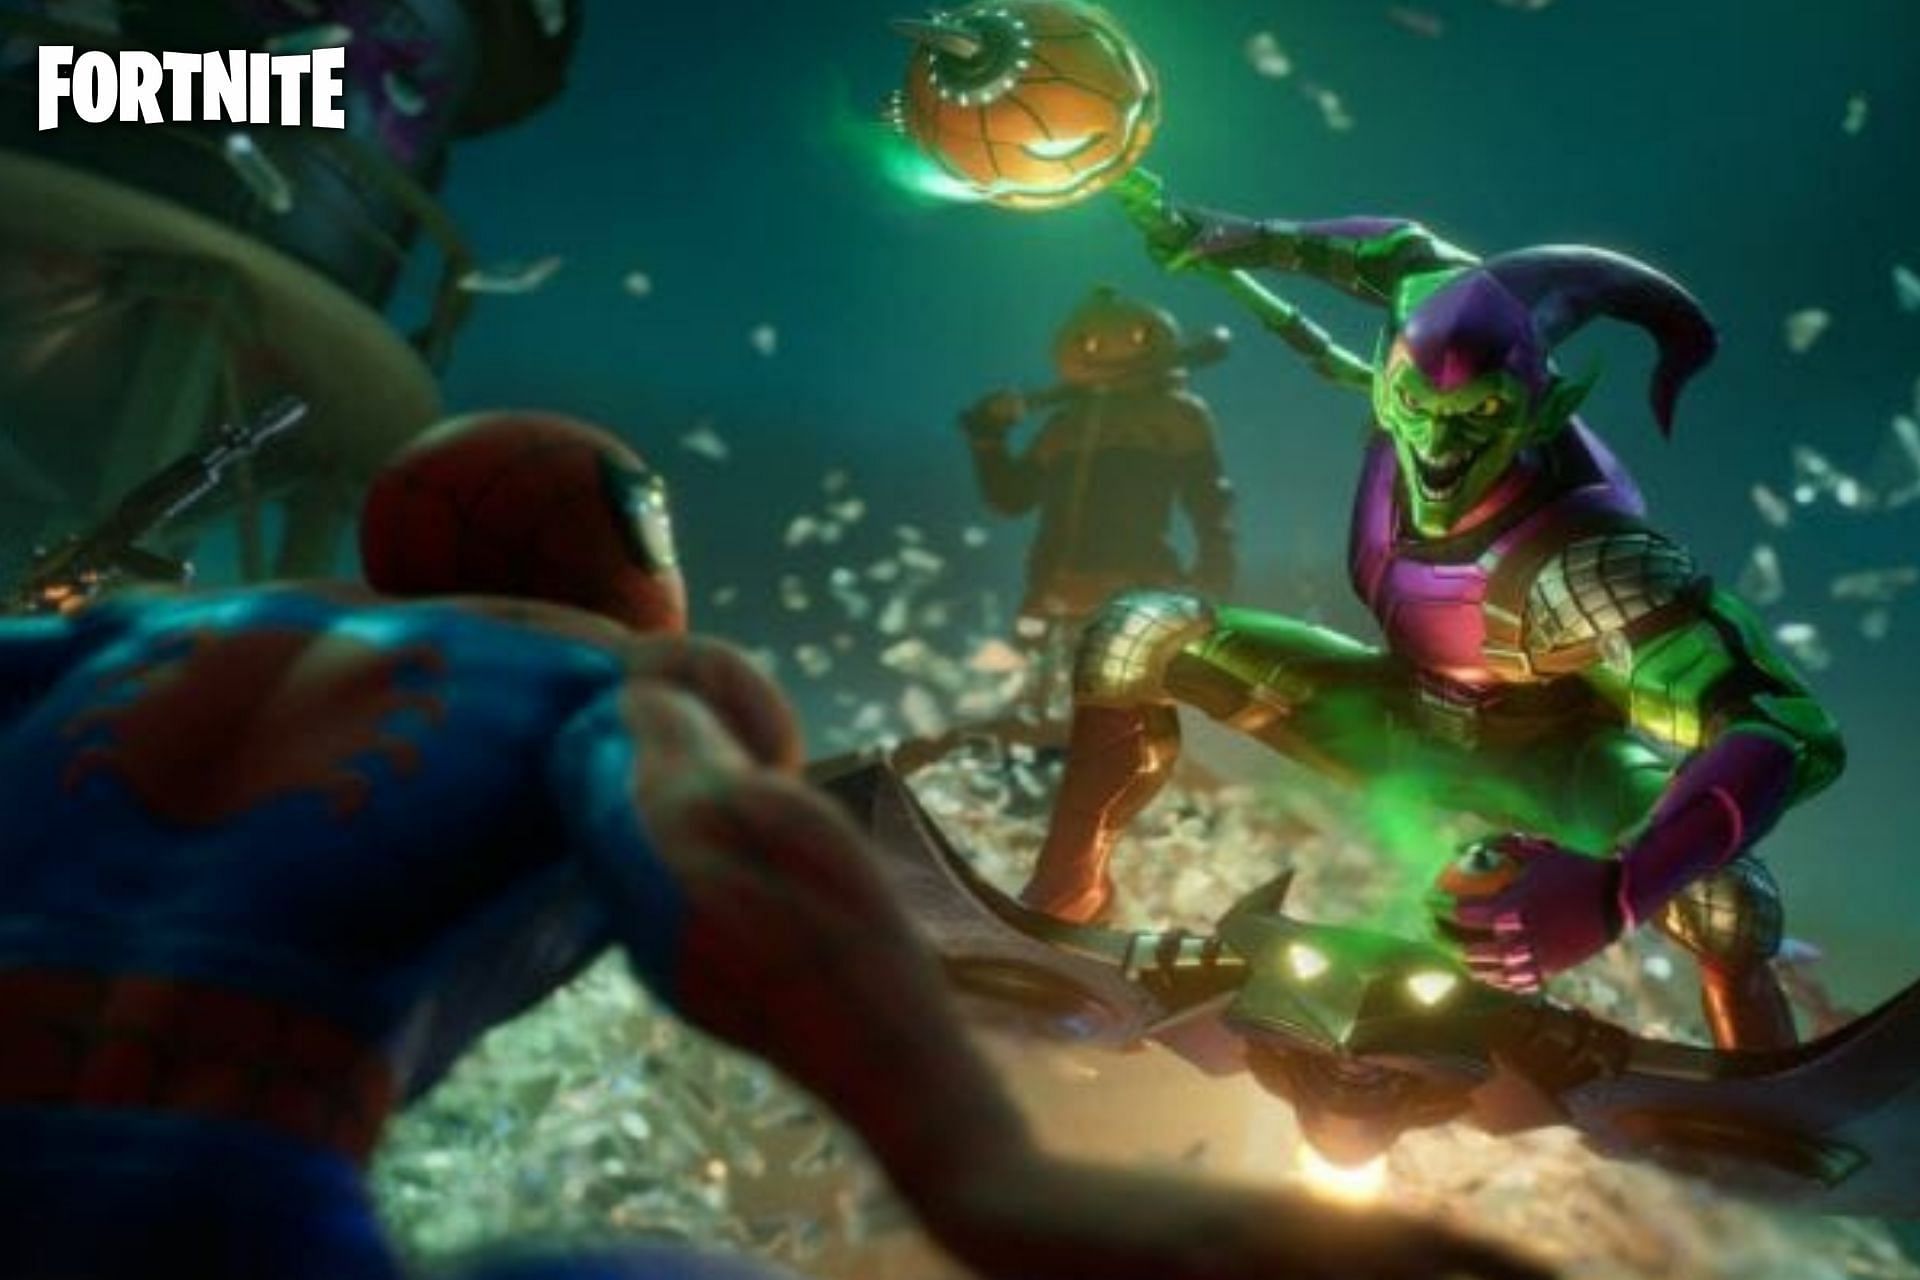 The Green Goblin is coming To Fortnite Chapter 3 soon, and players will be able to obtain the outfit from the Item Shop (Image via Sportskeeda)